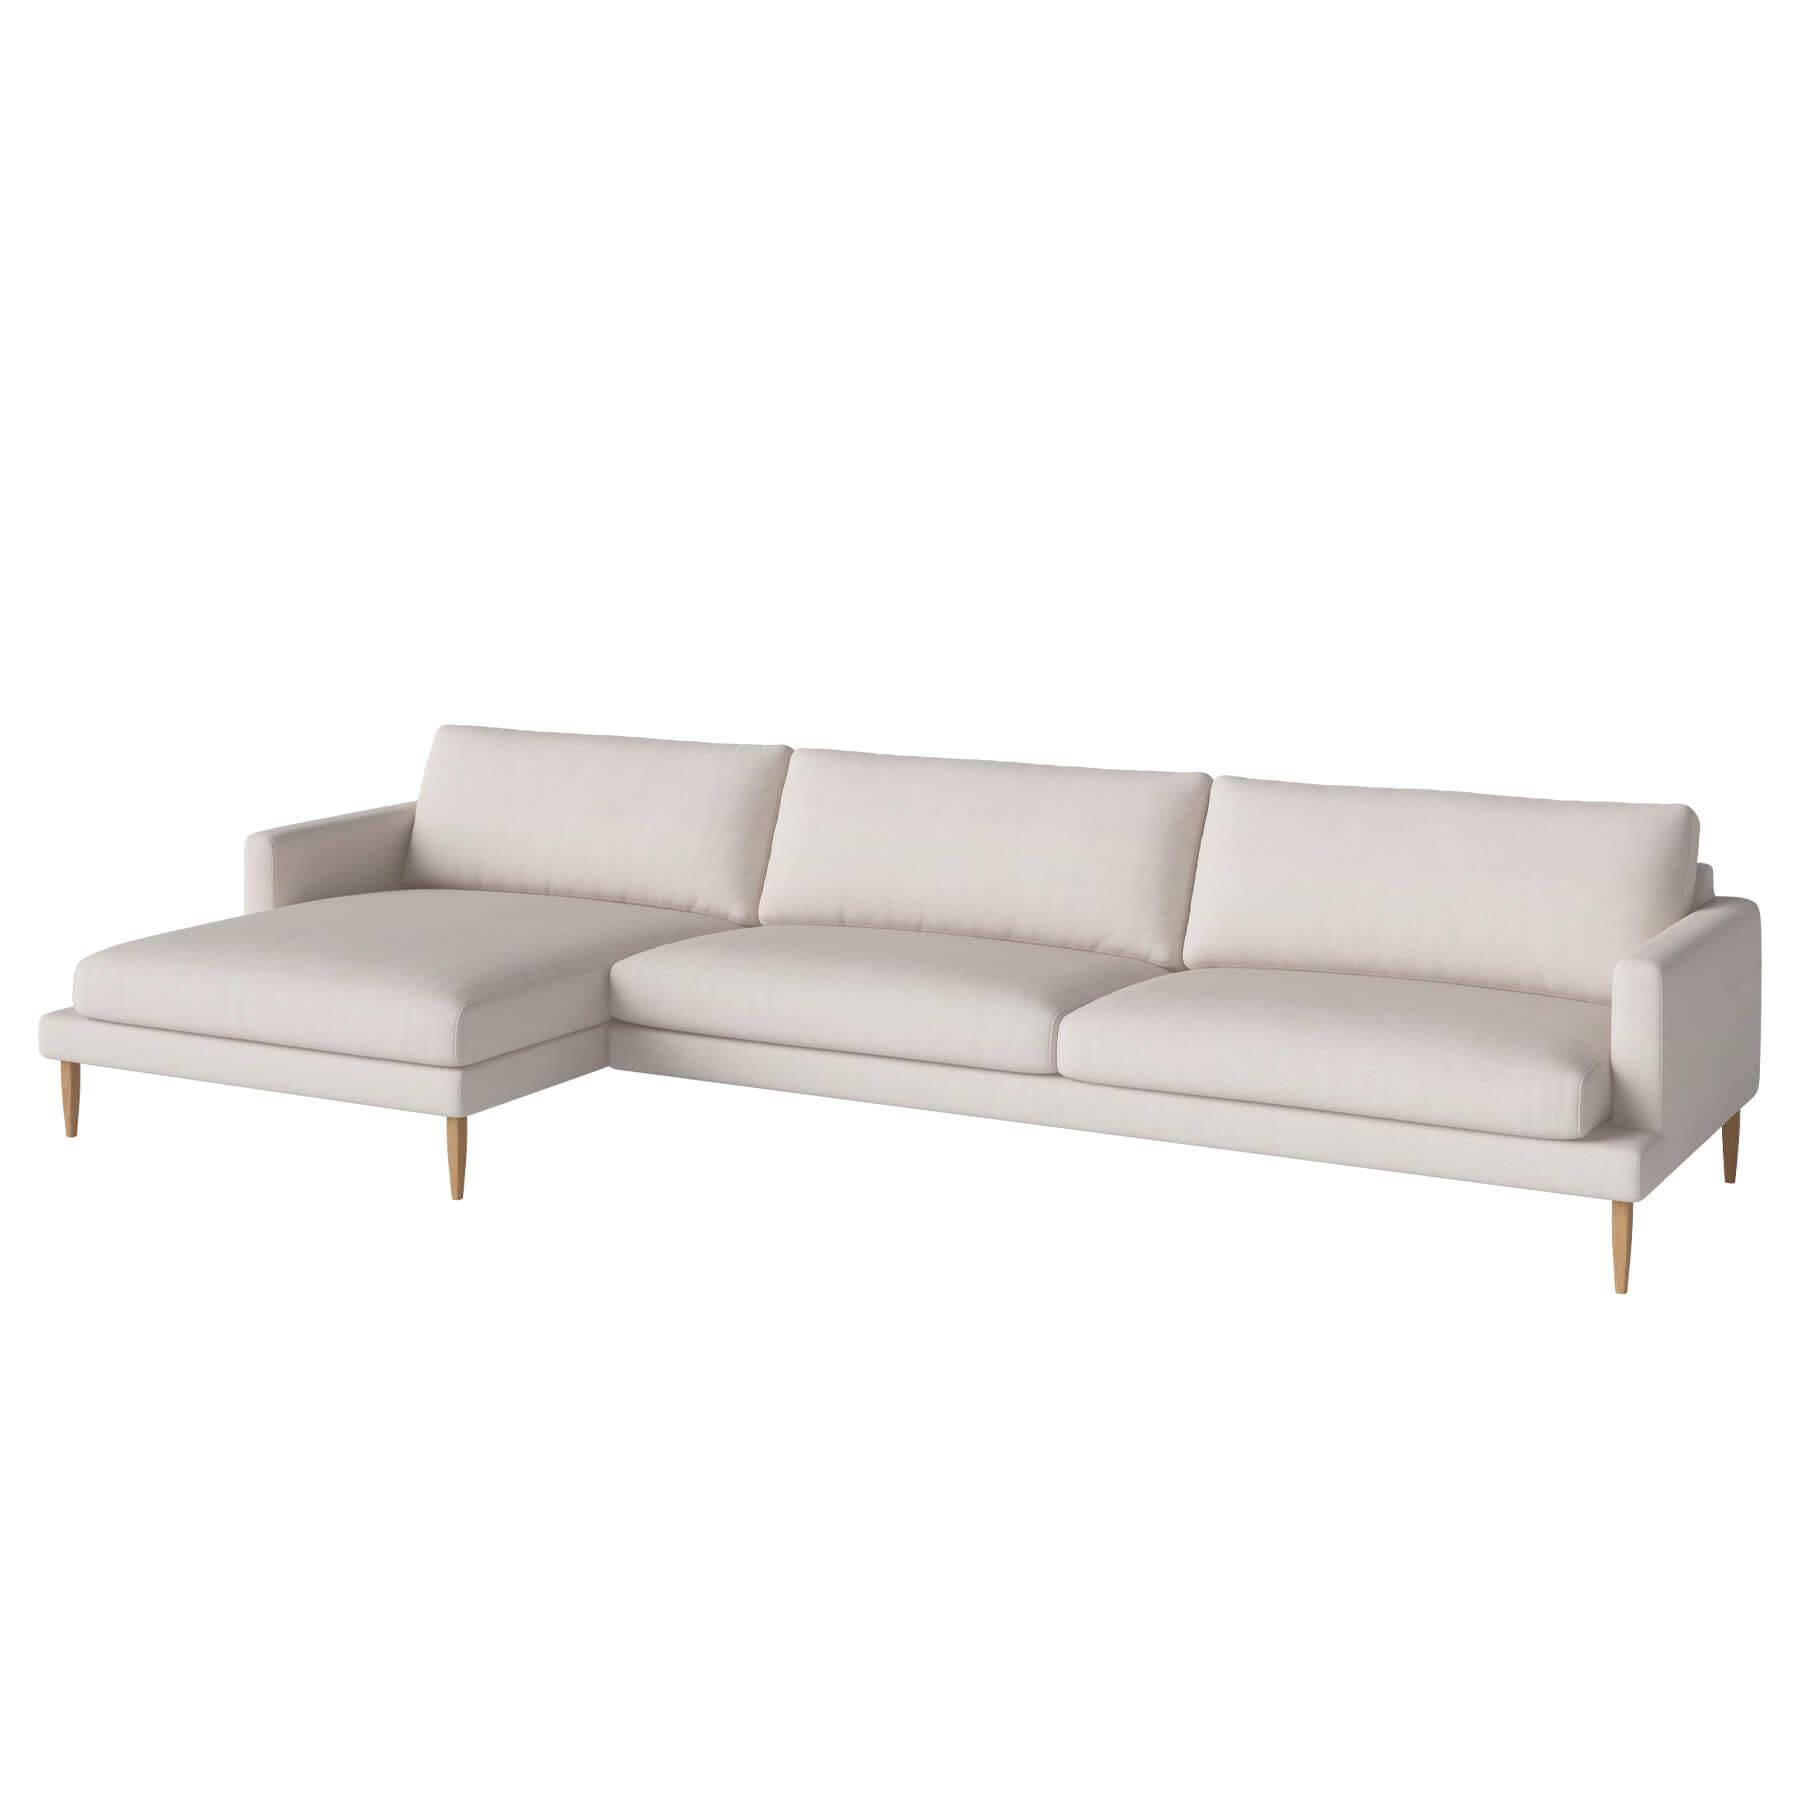 Bolia Veneda Sofa 45 Seater Sofa With Chaise Longue Oiled Oak Linea Beige Left Brown Designer Furniture From Holloways Of Ludlow